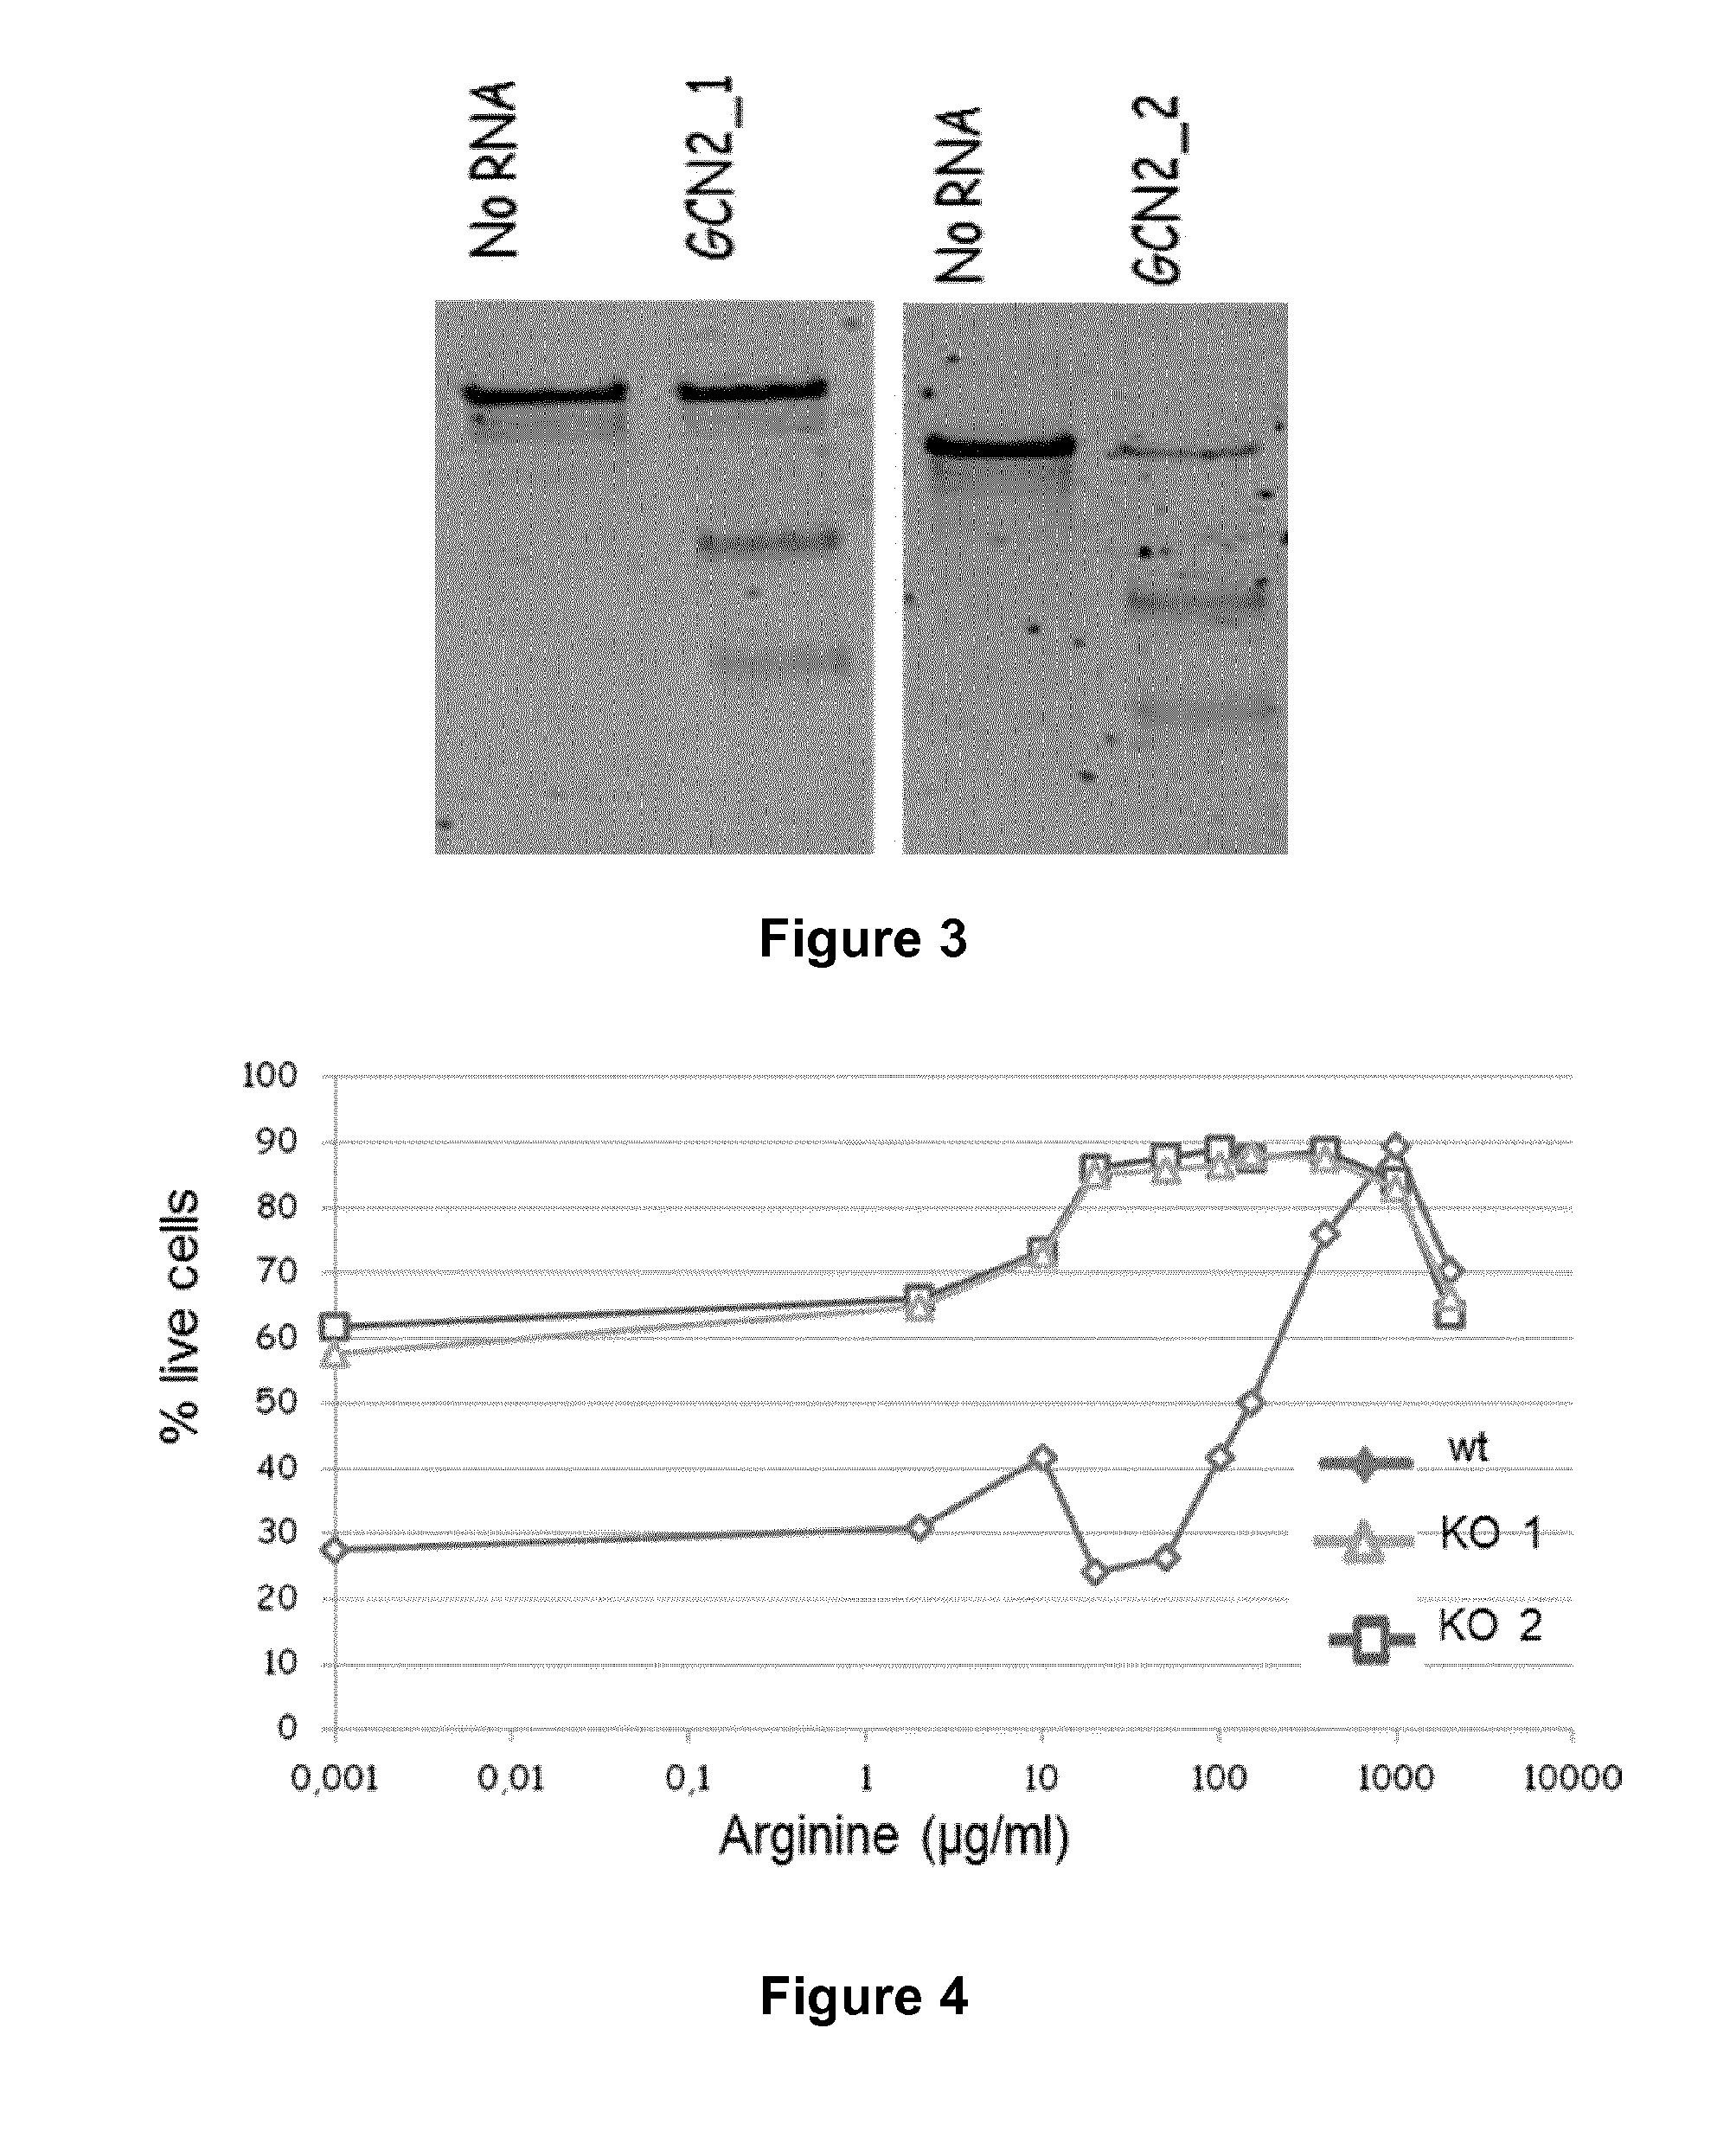 Method for generating immune cells resistant to arginine and/or tryptophan depleted microenvironment